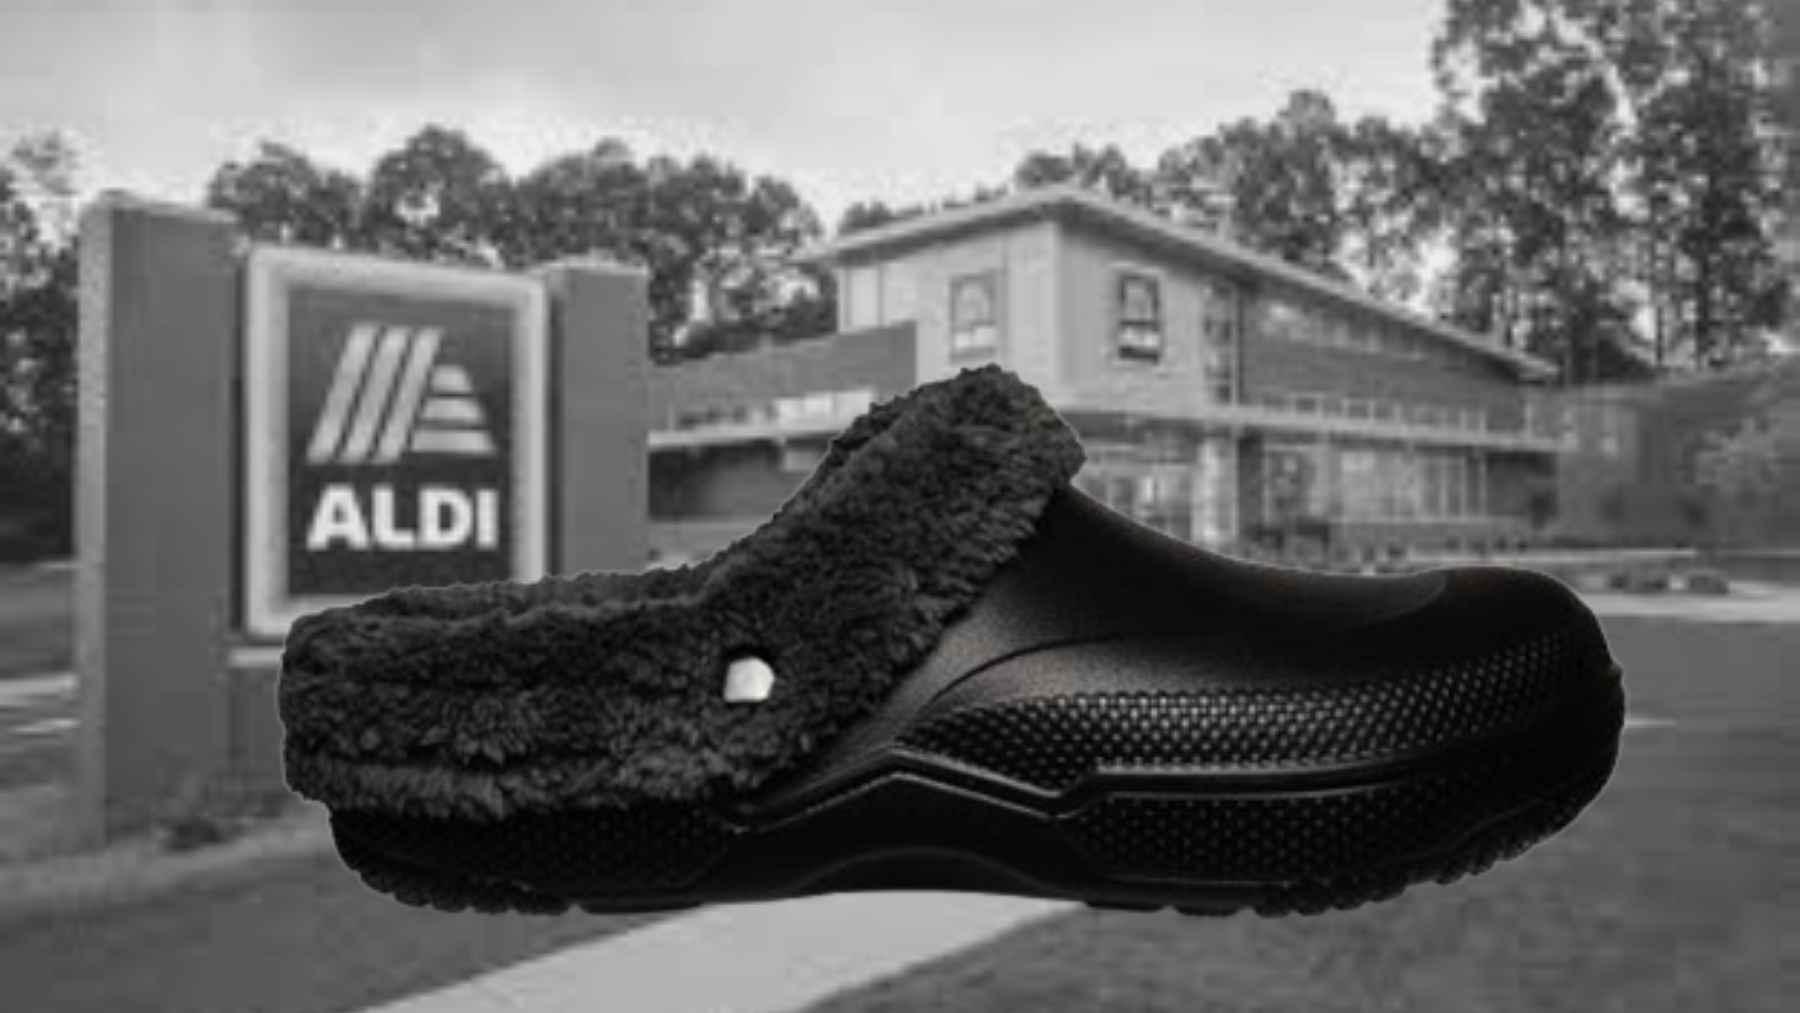 ALDI imitates the most classic Crocs clogs that protects from the cold